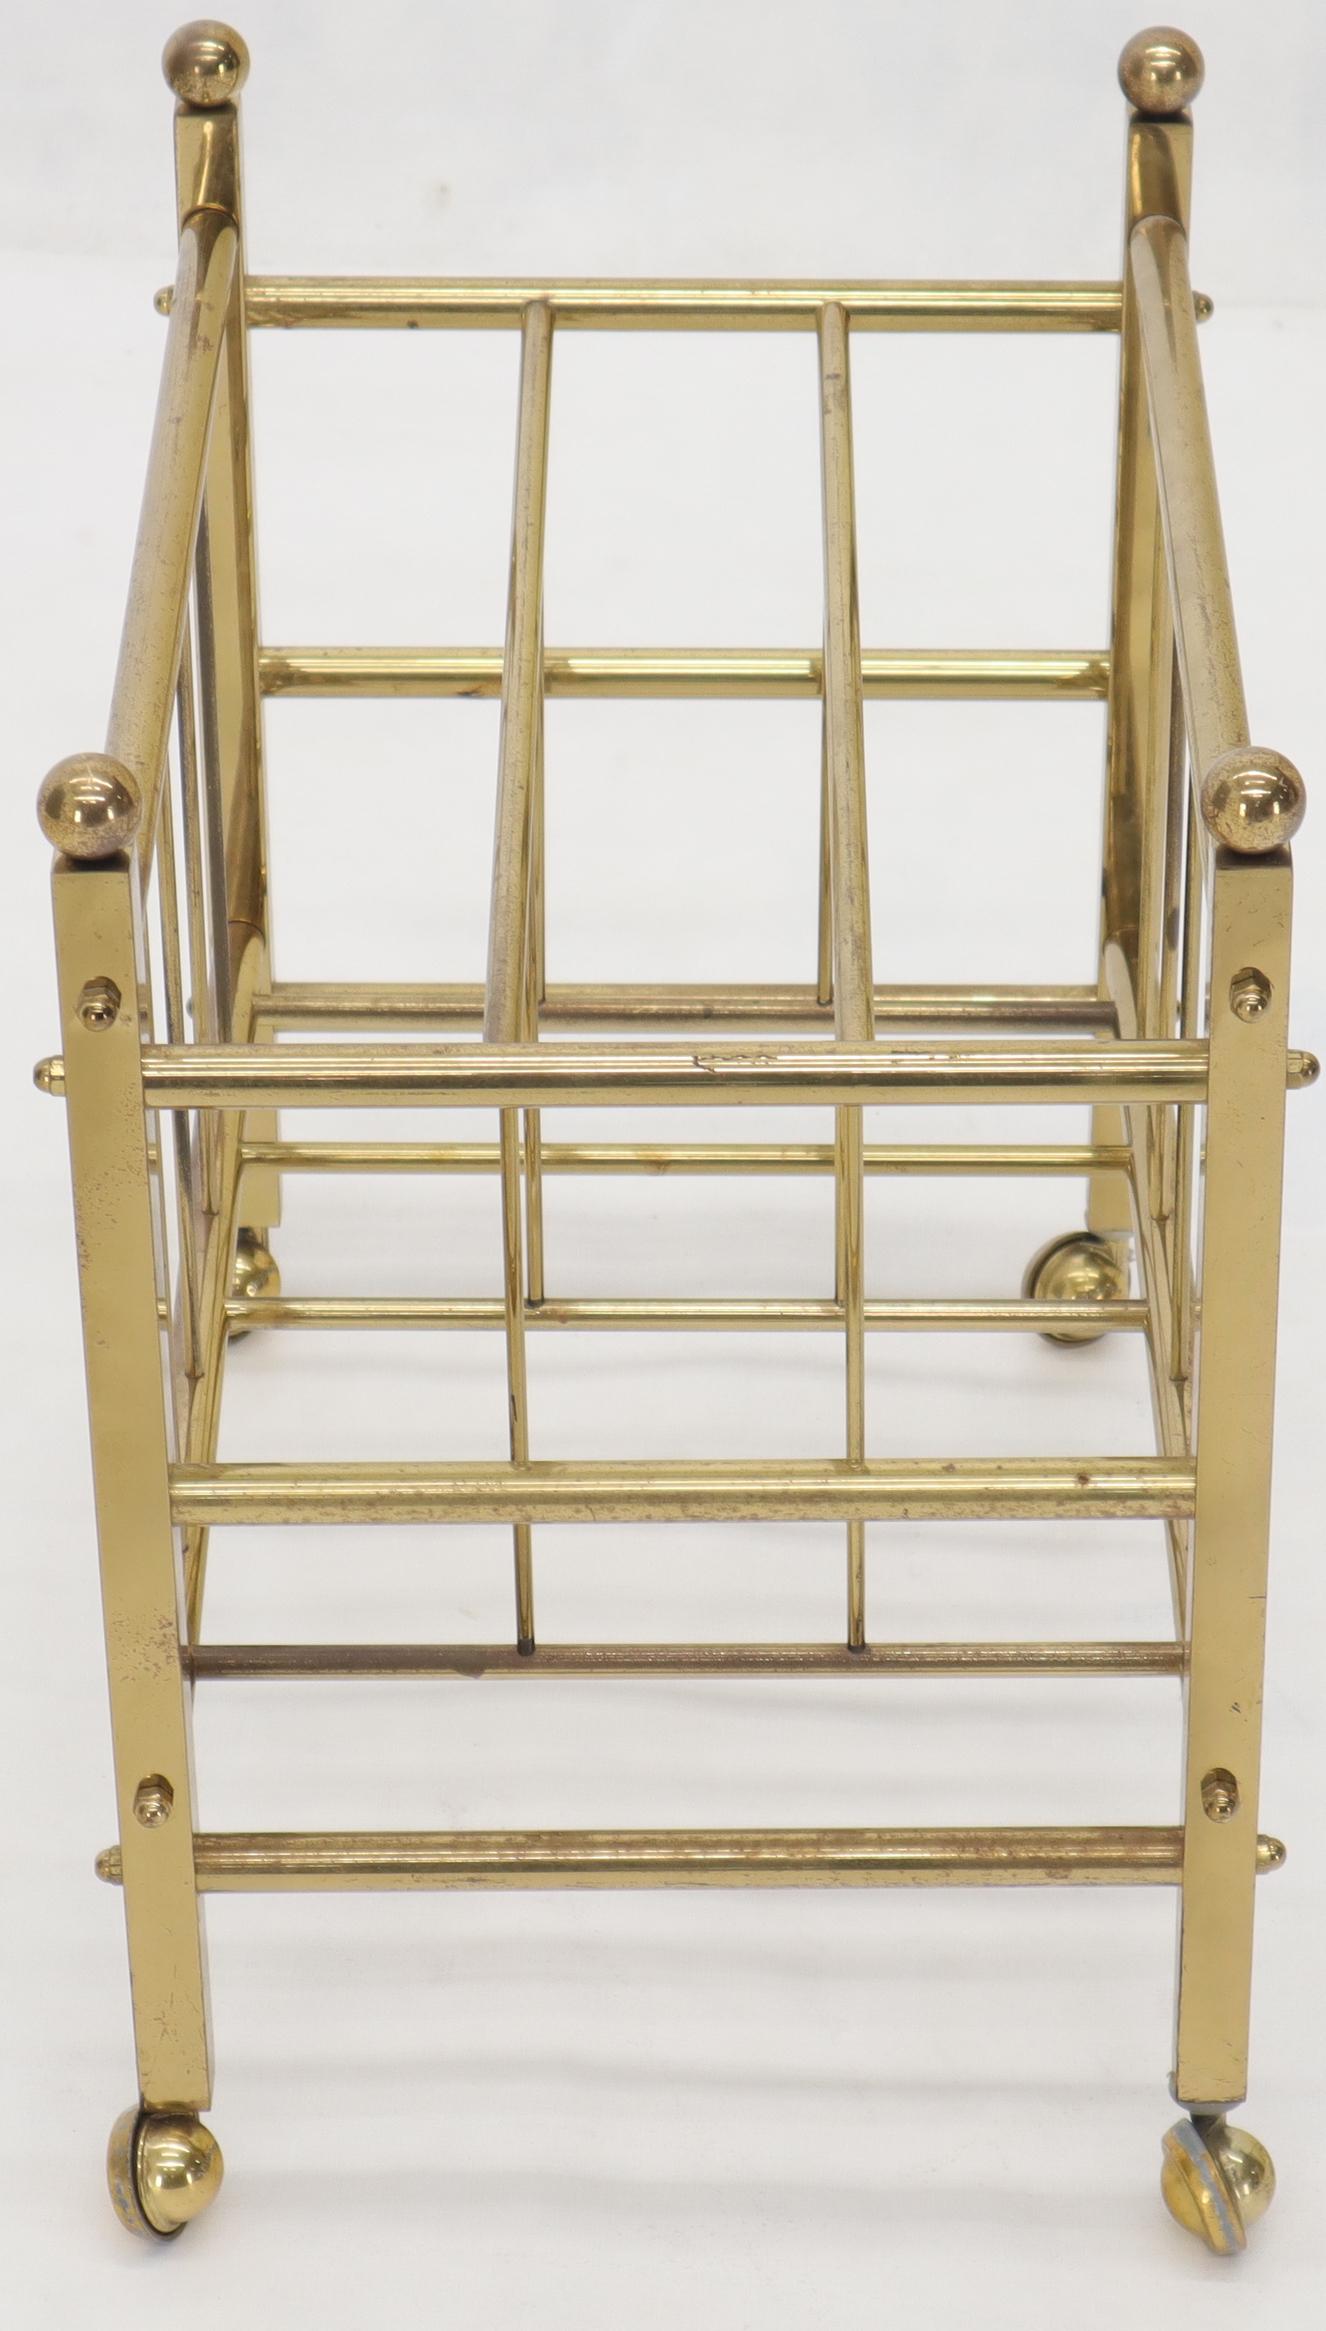 Pair of Mid-Century Modern Polished Brass Magazine Racks on Metal Casters For Sale 7